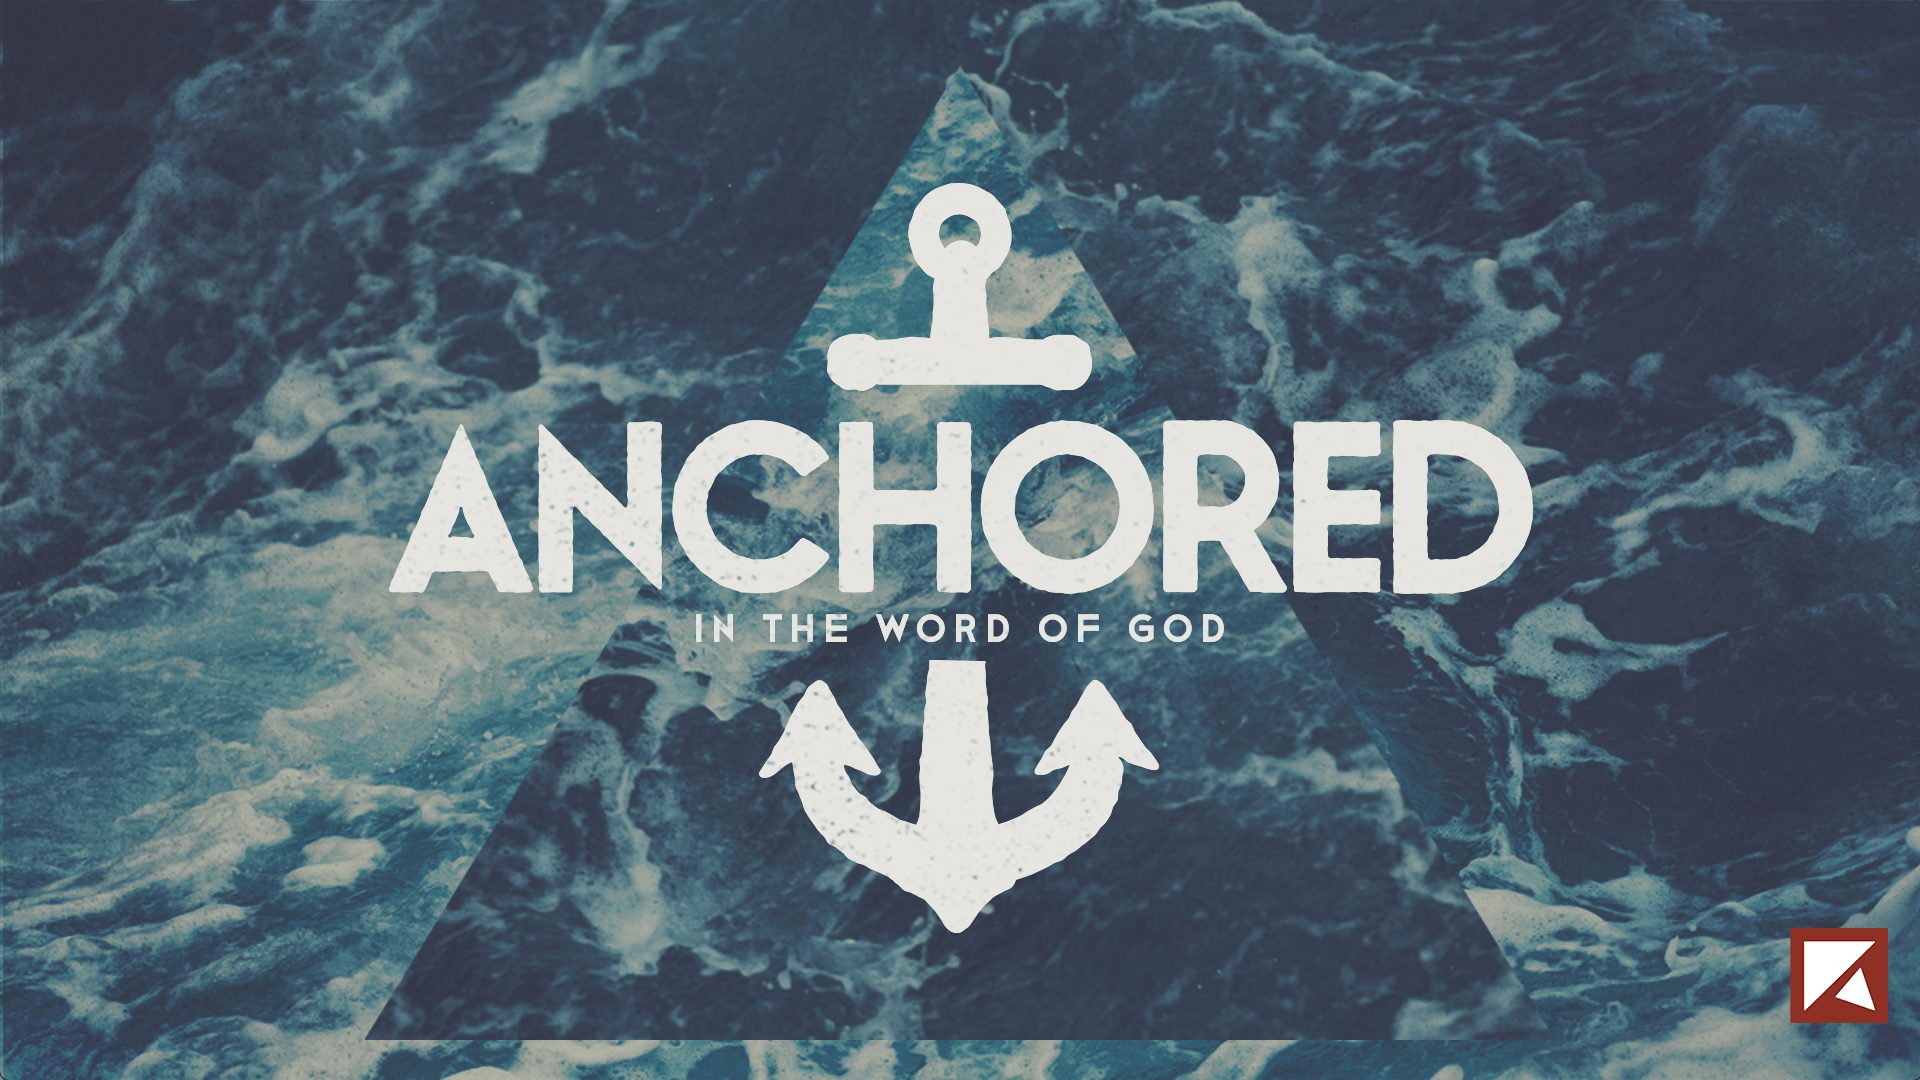 Featured image for “Anchored in the Word of God”